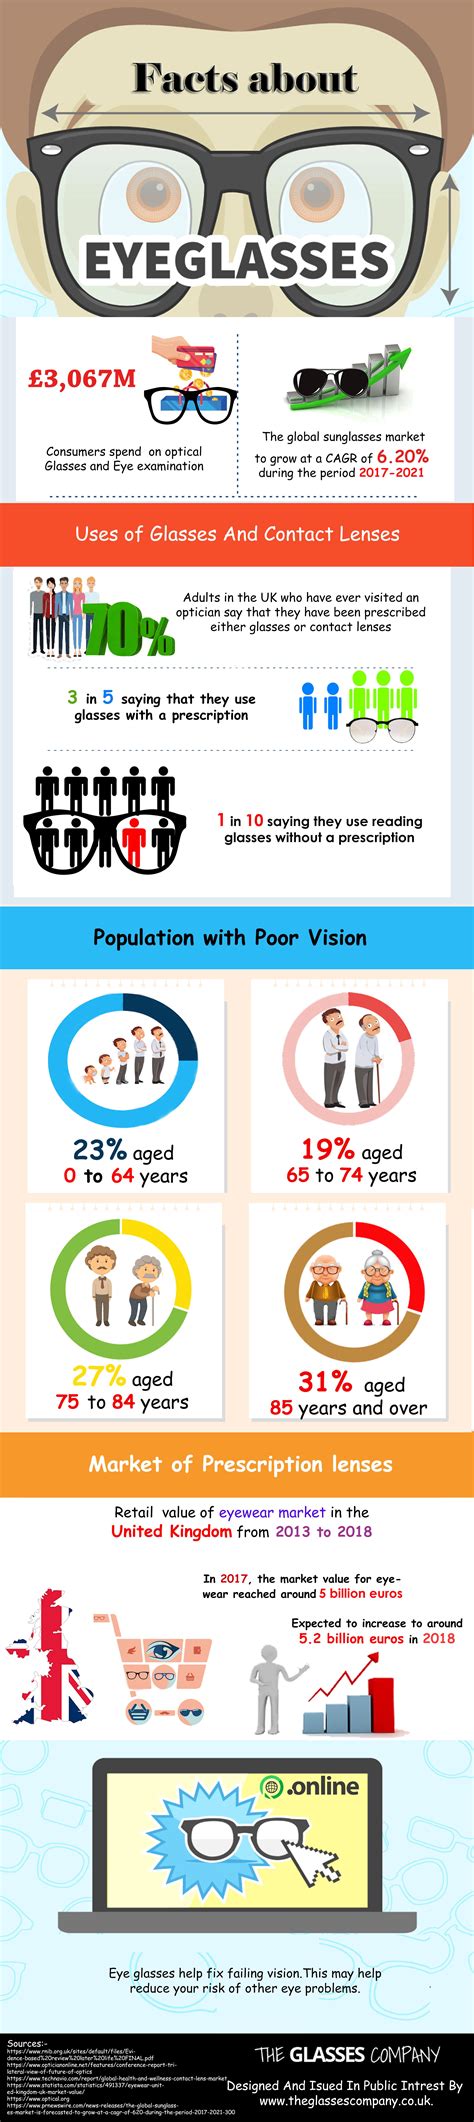 This Infographic Related To The Eyeglasses And Its Facts Pinterest Infographic Facts